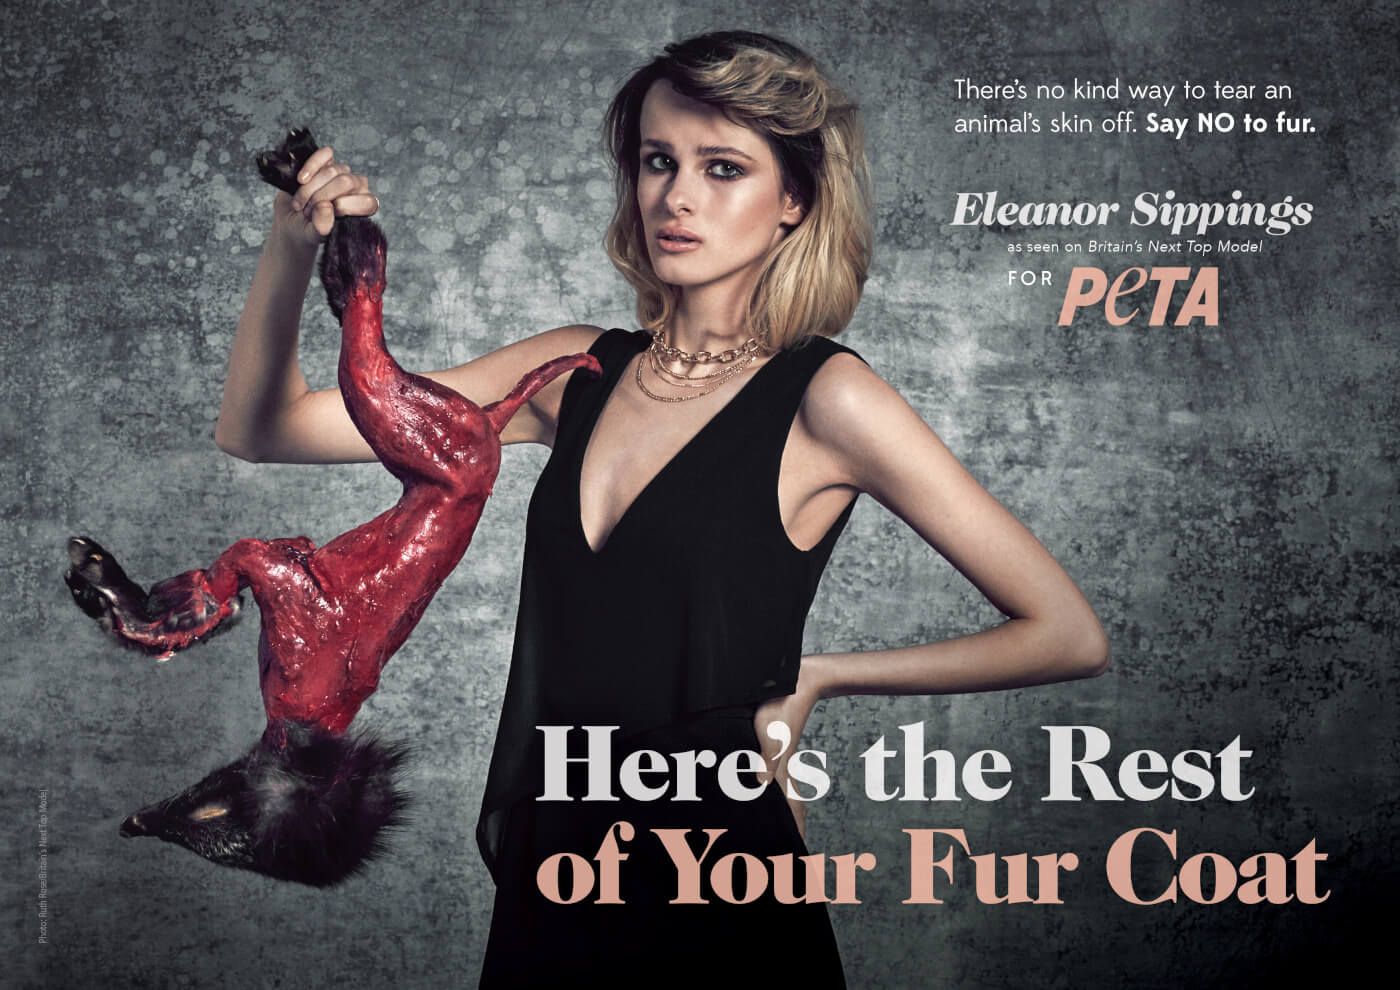 A campaign by PETA to stop the purchasing of fur coats; a model holding a skinned animal.